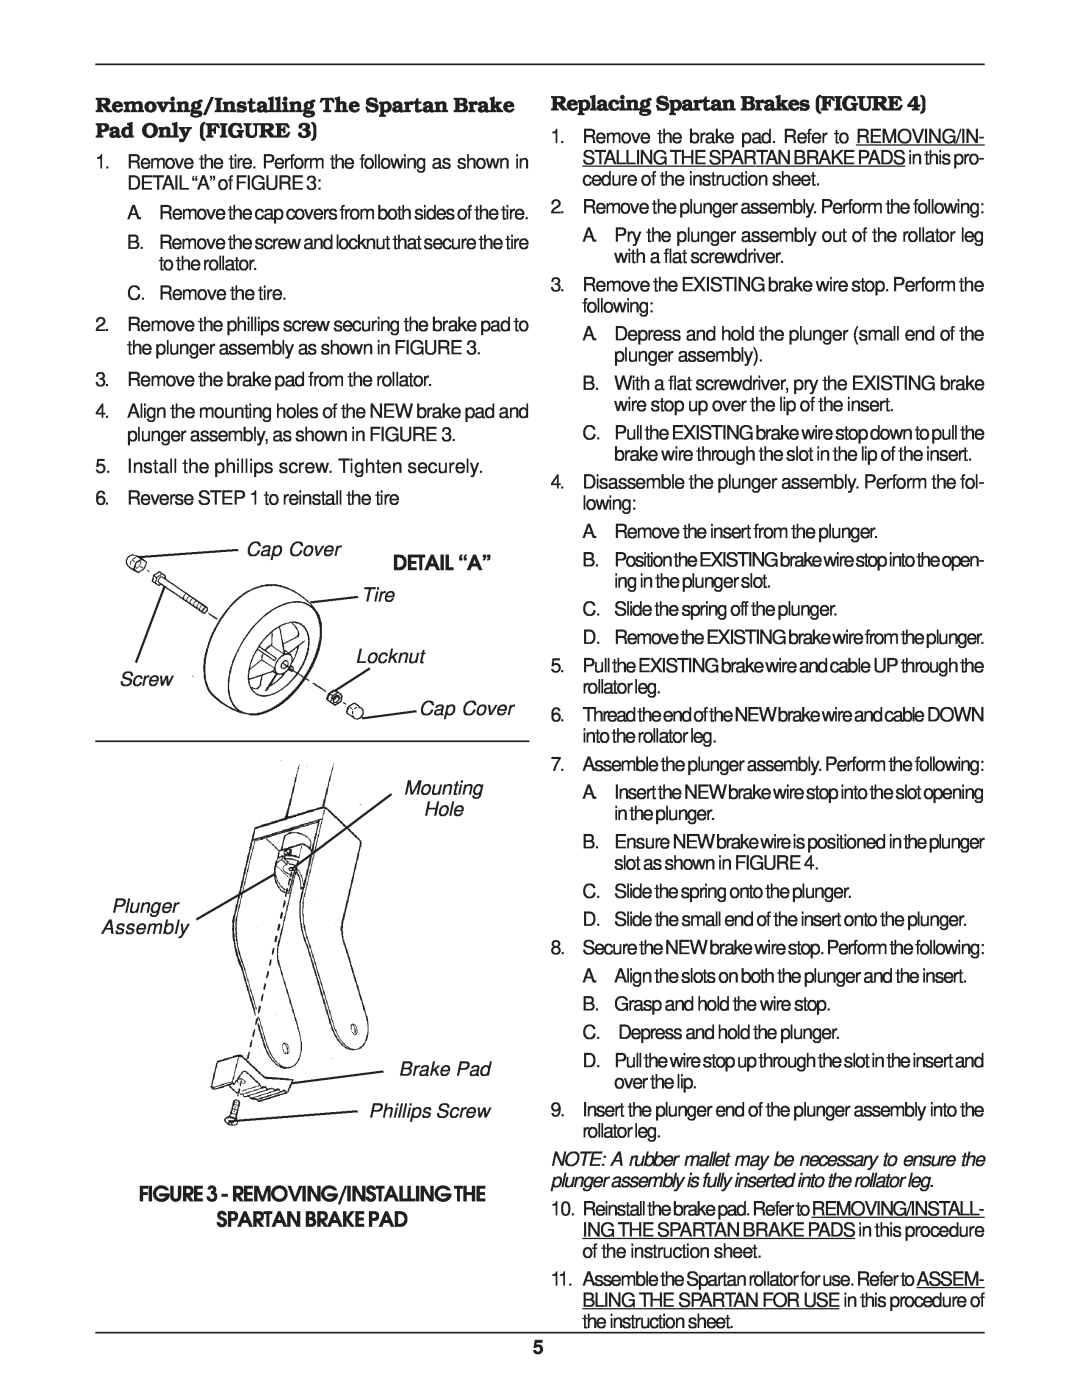 Invacare 65600 Removing/Installing The Spartan Brake Pad Only FIGURE, Detail “A”, Removing/Installingthe Spartan Brake Pad 